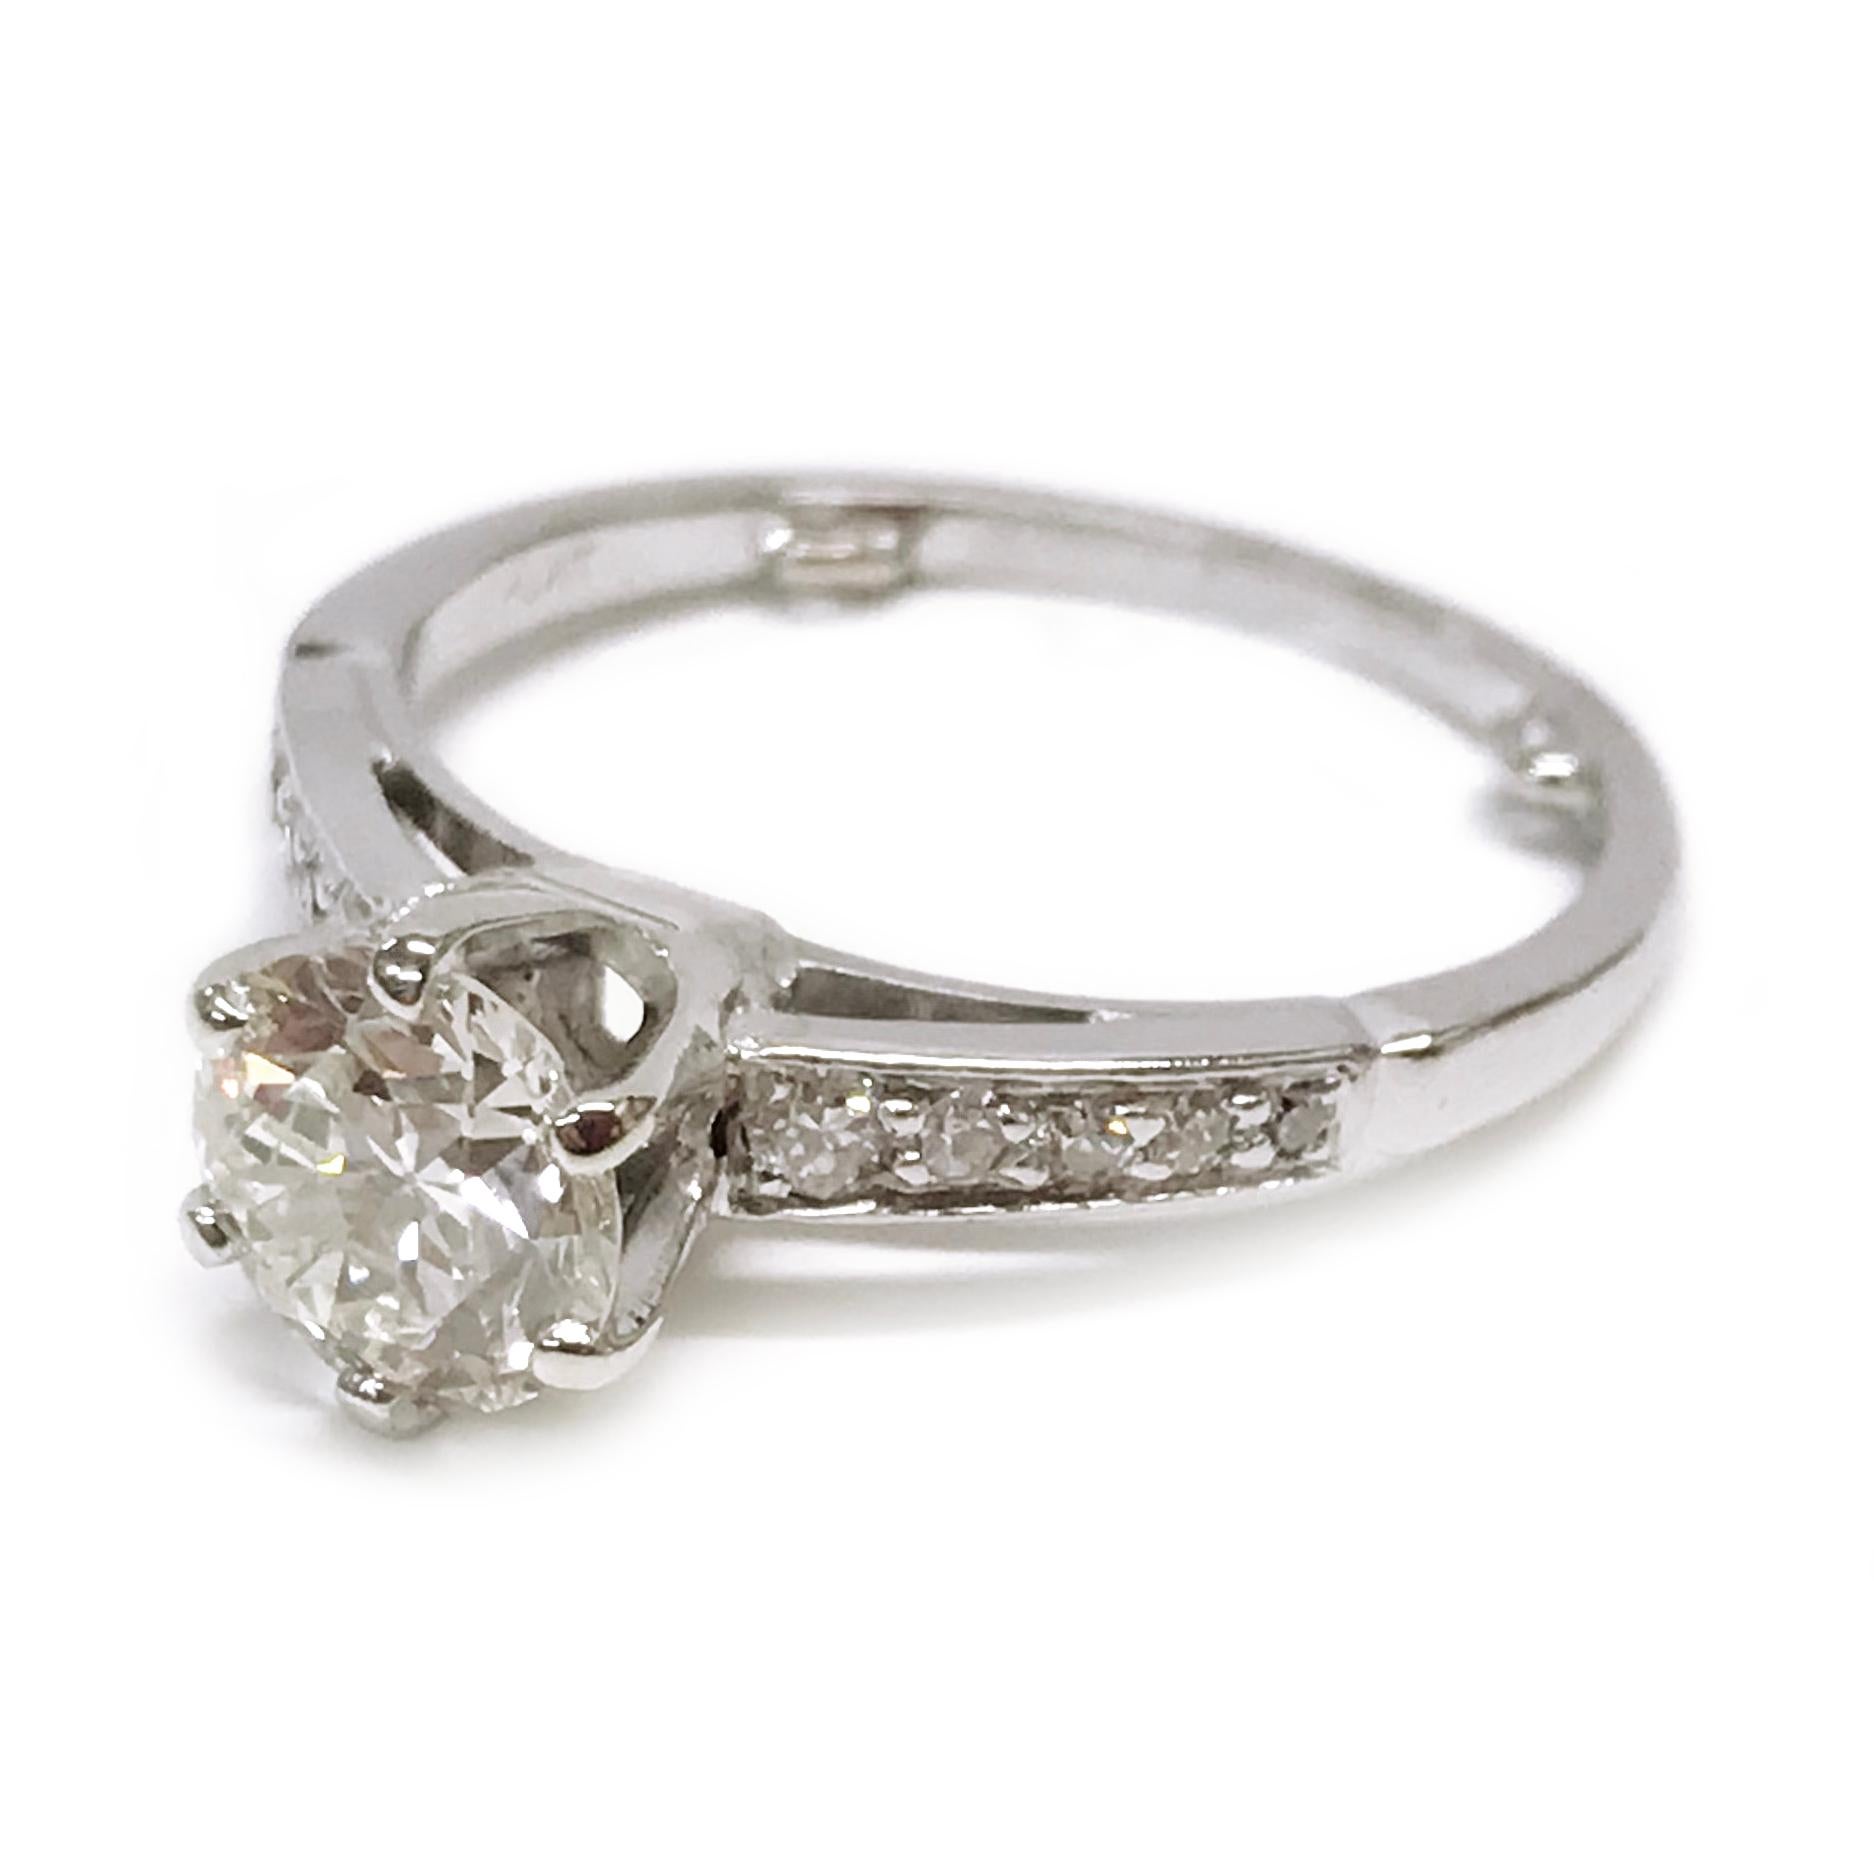 Diamond Platinum Engagement Ring, size 5.75. The center six-prong round Old European-cut diamond measures 6.39mm x 6.32mm x 3.79mm for a carat weight of 0.99ct. The diamond is I2 (G.I.A.) in clarity and K (G.I.A.) in color. Five graduate bead-set